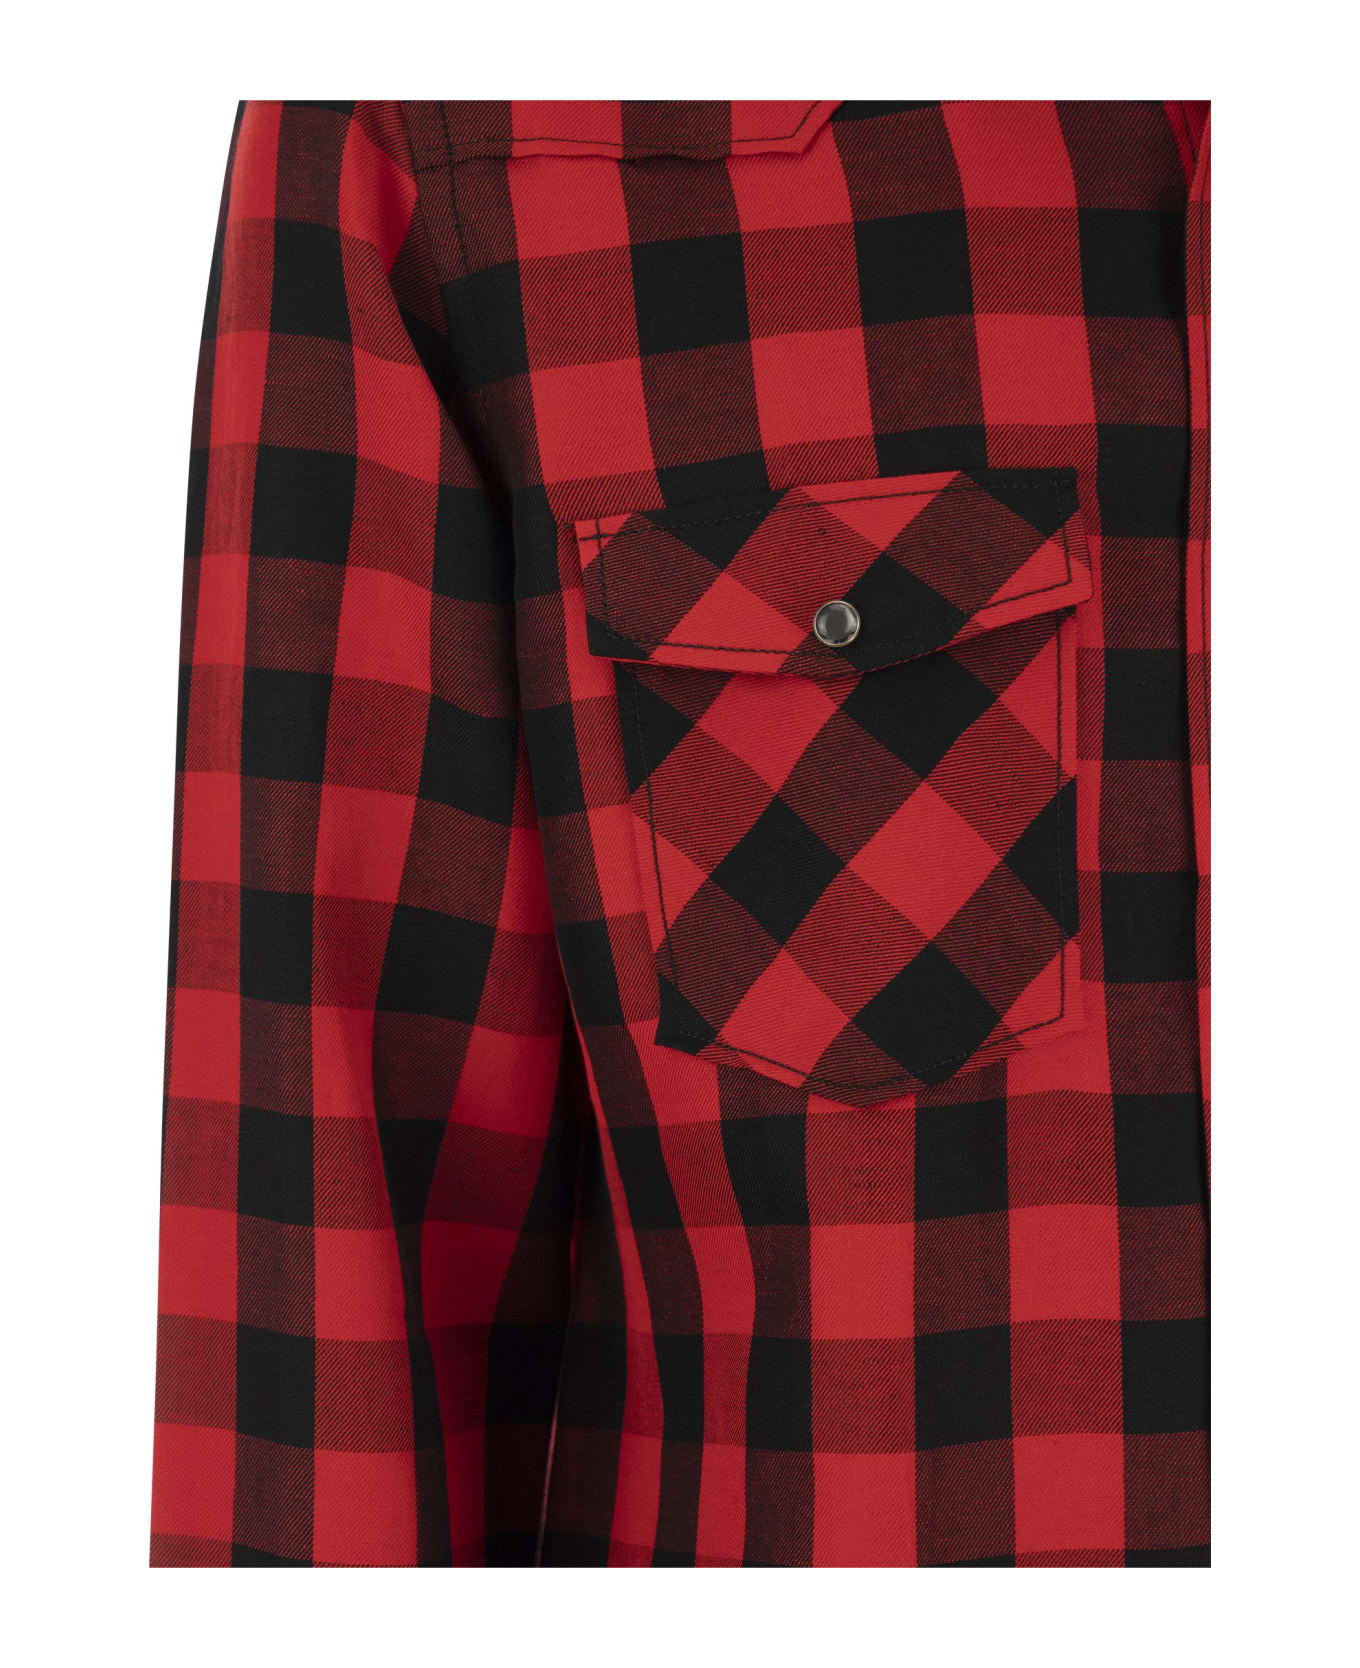 PT Torino Checked Shirt In Cotton And Linen Blend - Red/black